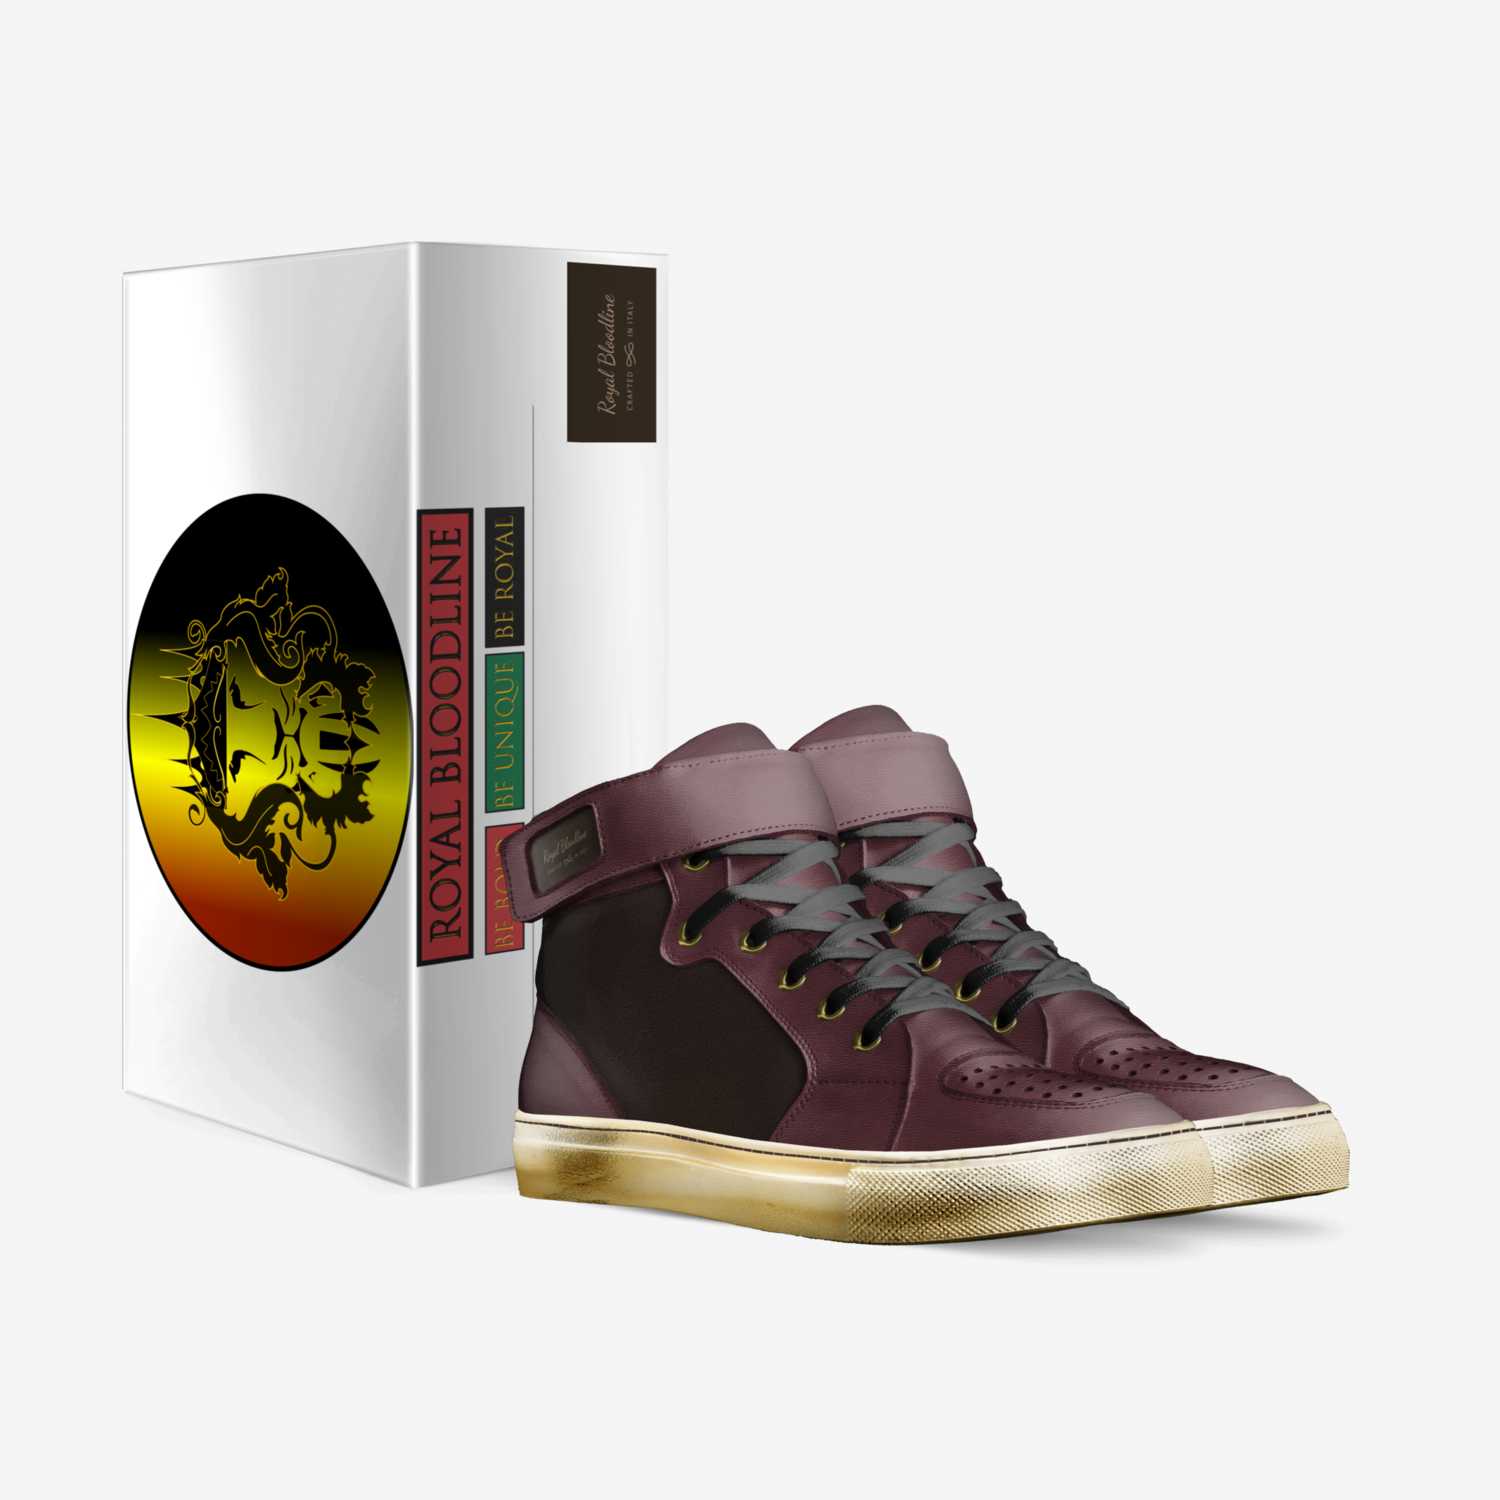 Royal Bloodline custom made in Italy shoes by Jt Mitchum | Box view